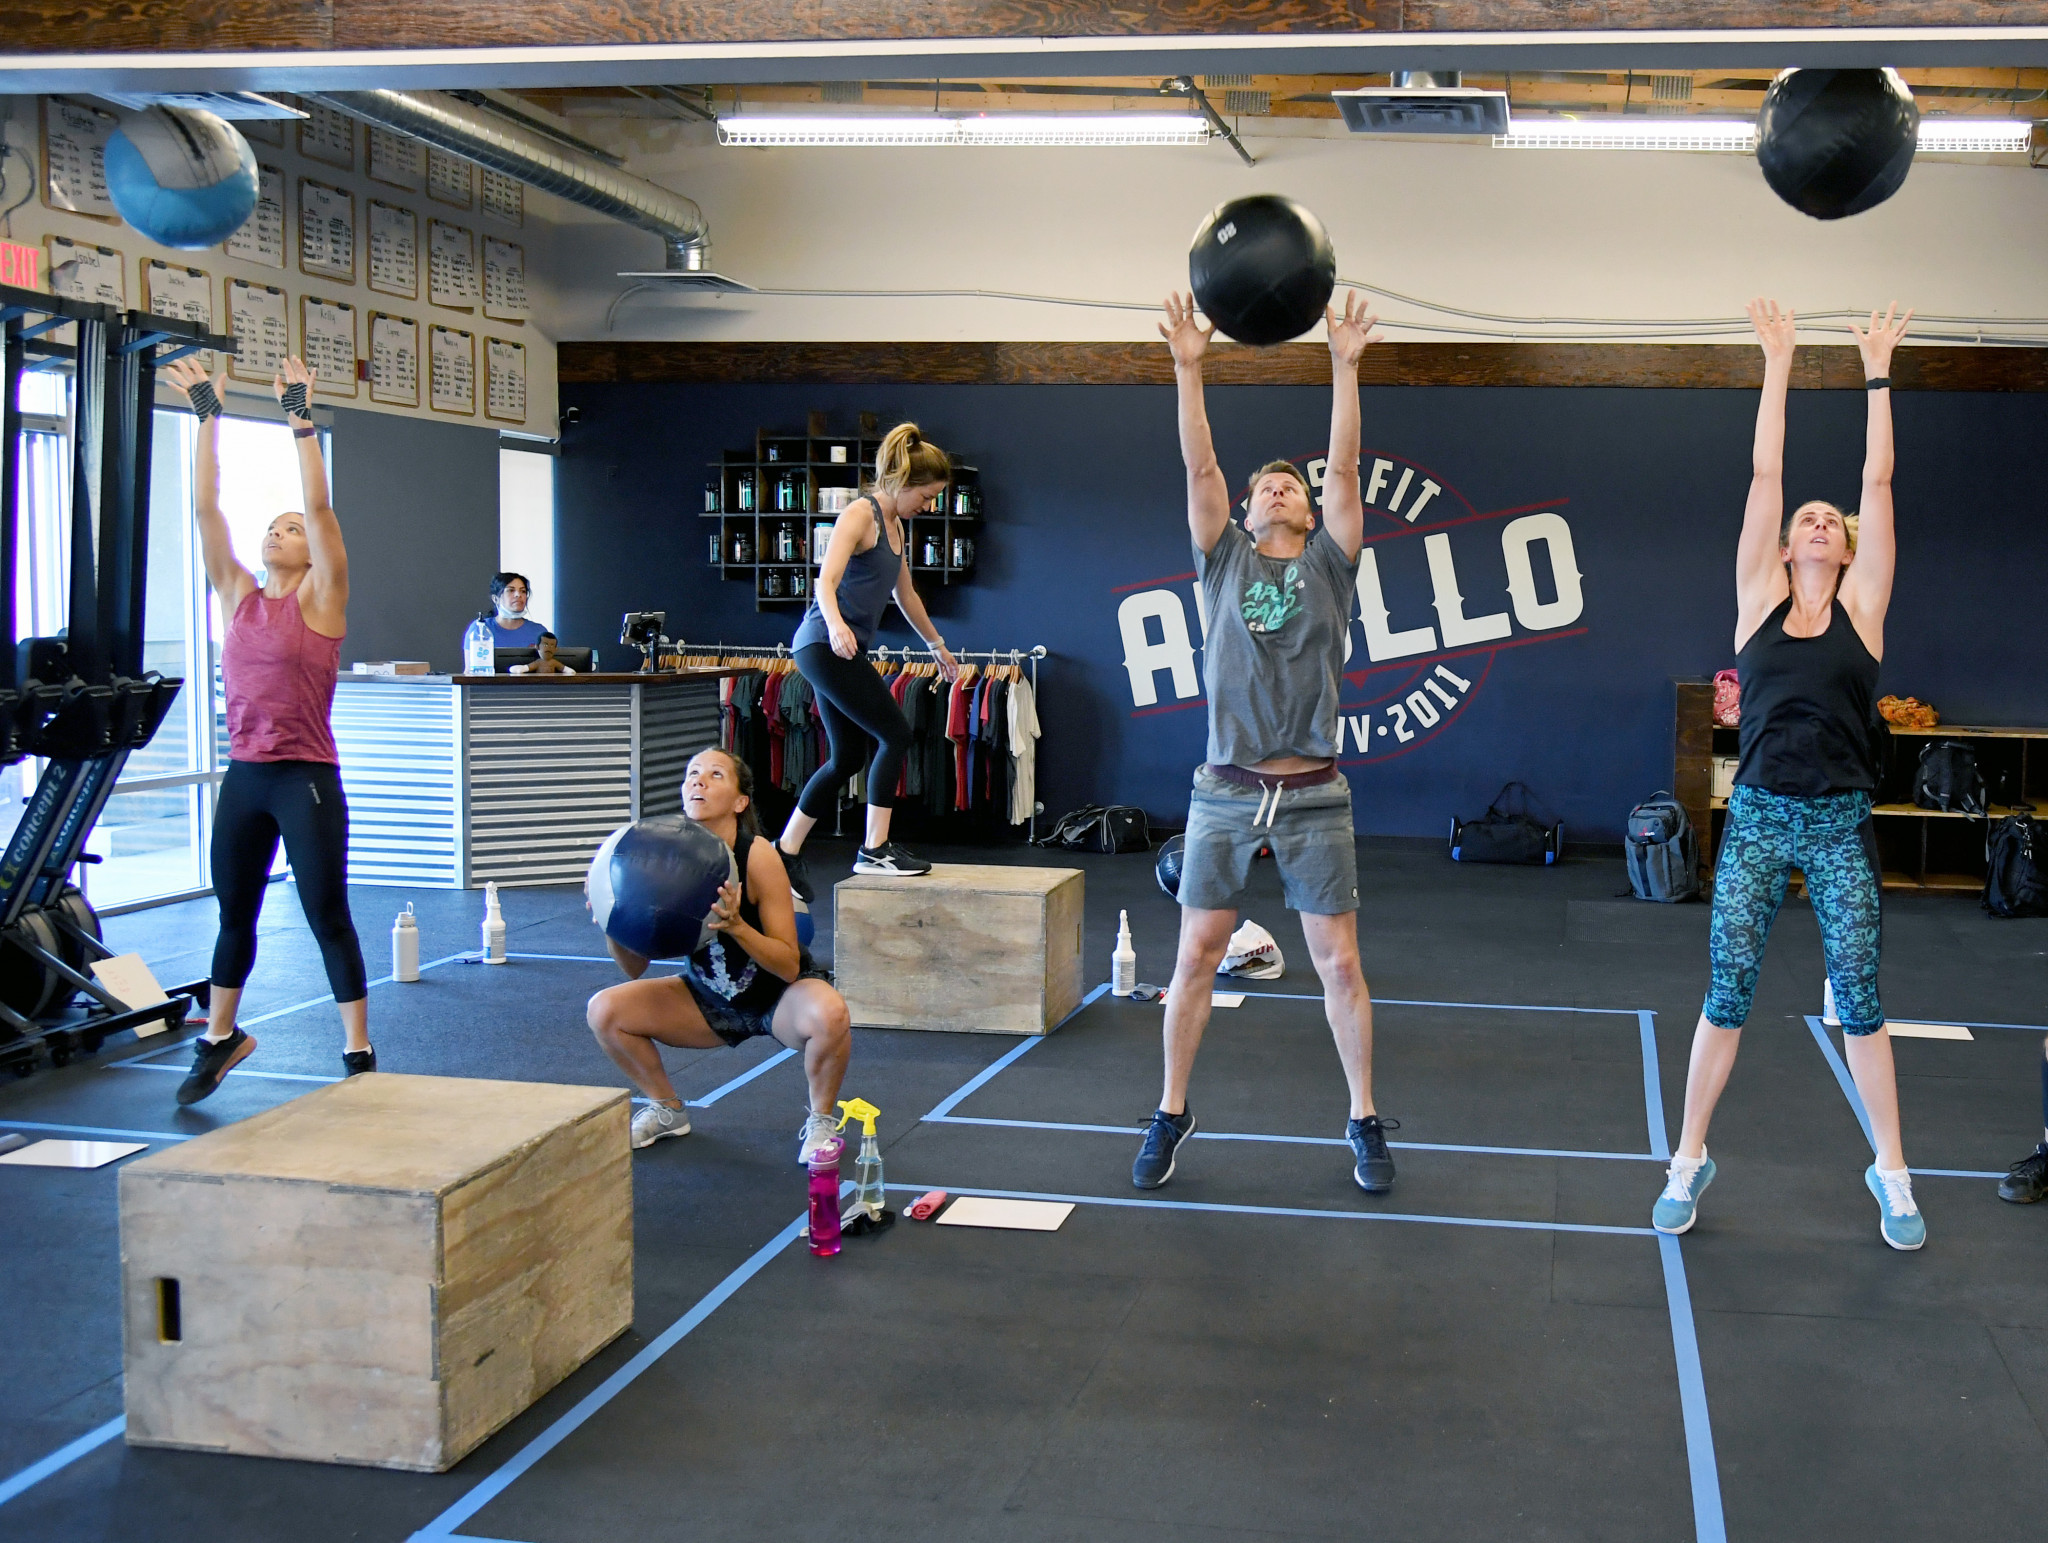 In excess of 100 gyms have disaffiliated from CrossFit following Glassman's tweet ©Getty Images